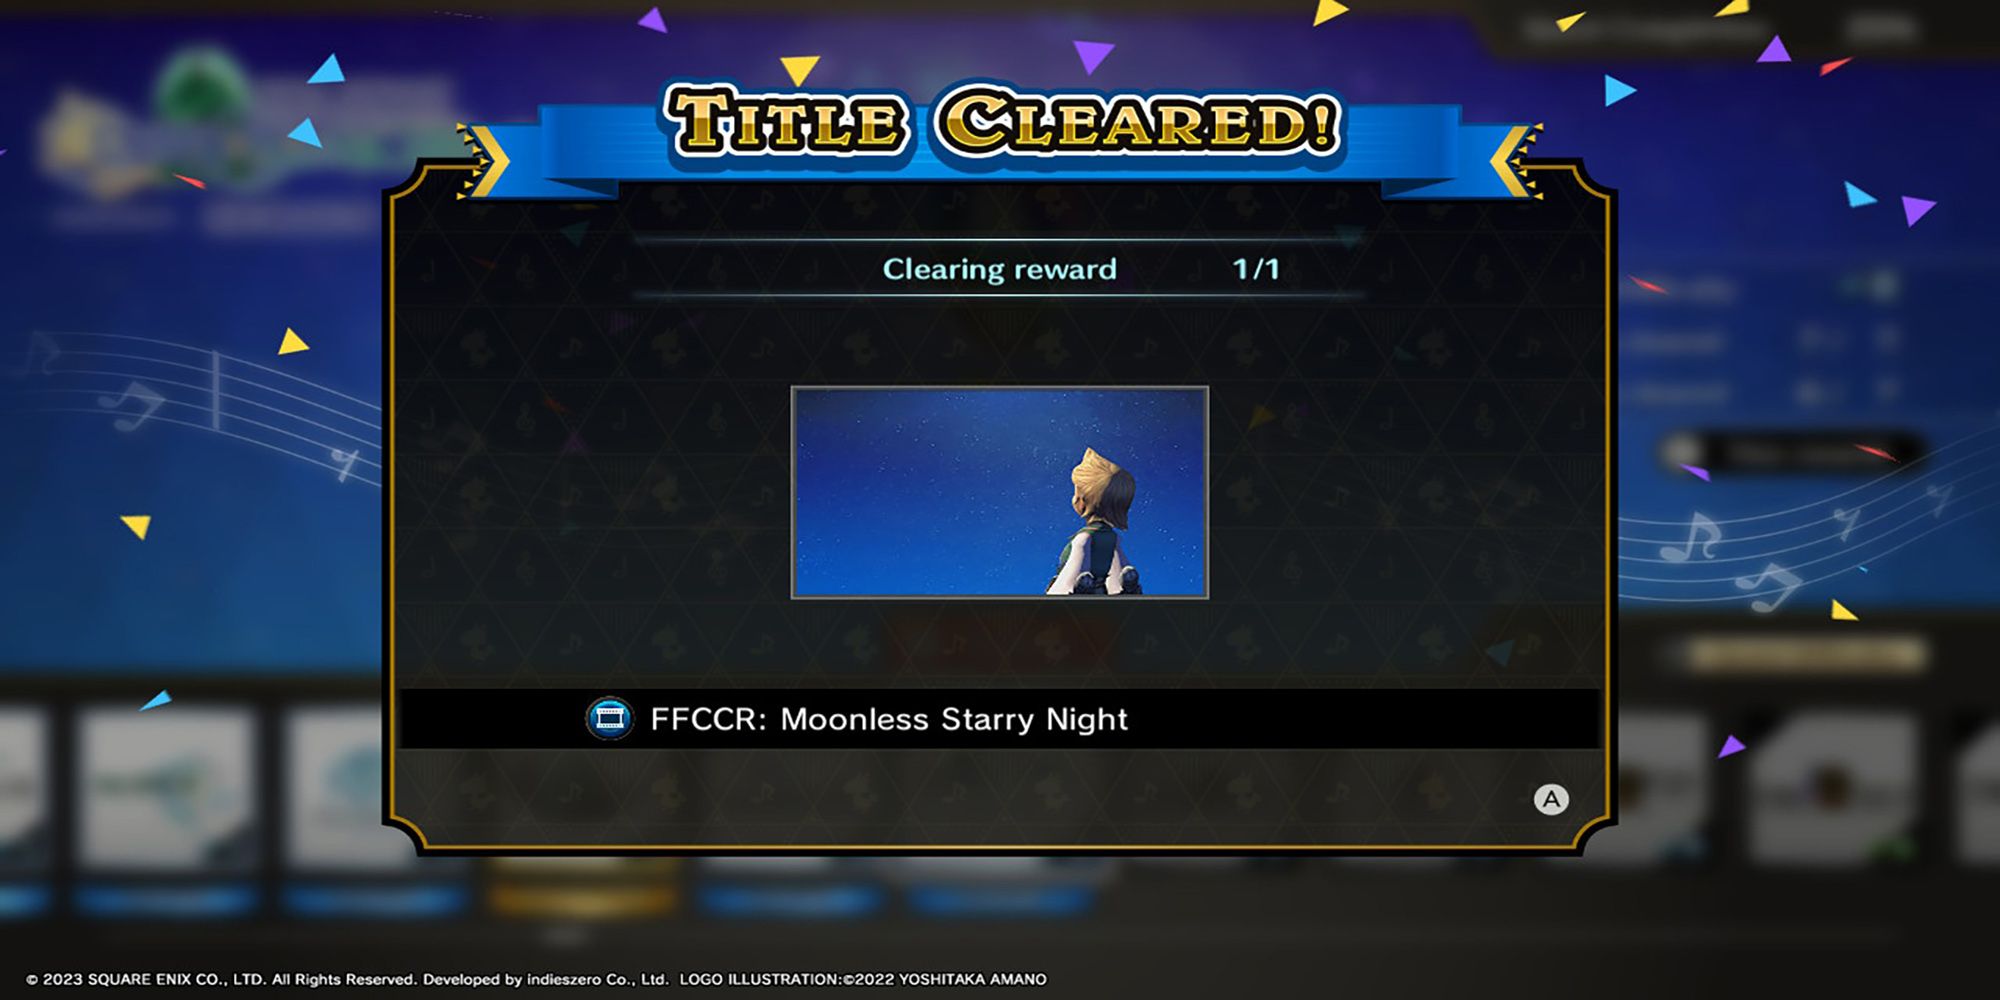 The Evenet Music Stage "FFCCR: Moonless Starry Night" unlocks after clearing FFCCR in Theatrhythm's Series Quest mode.